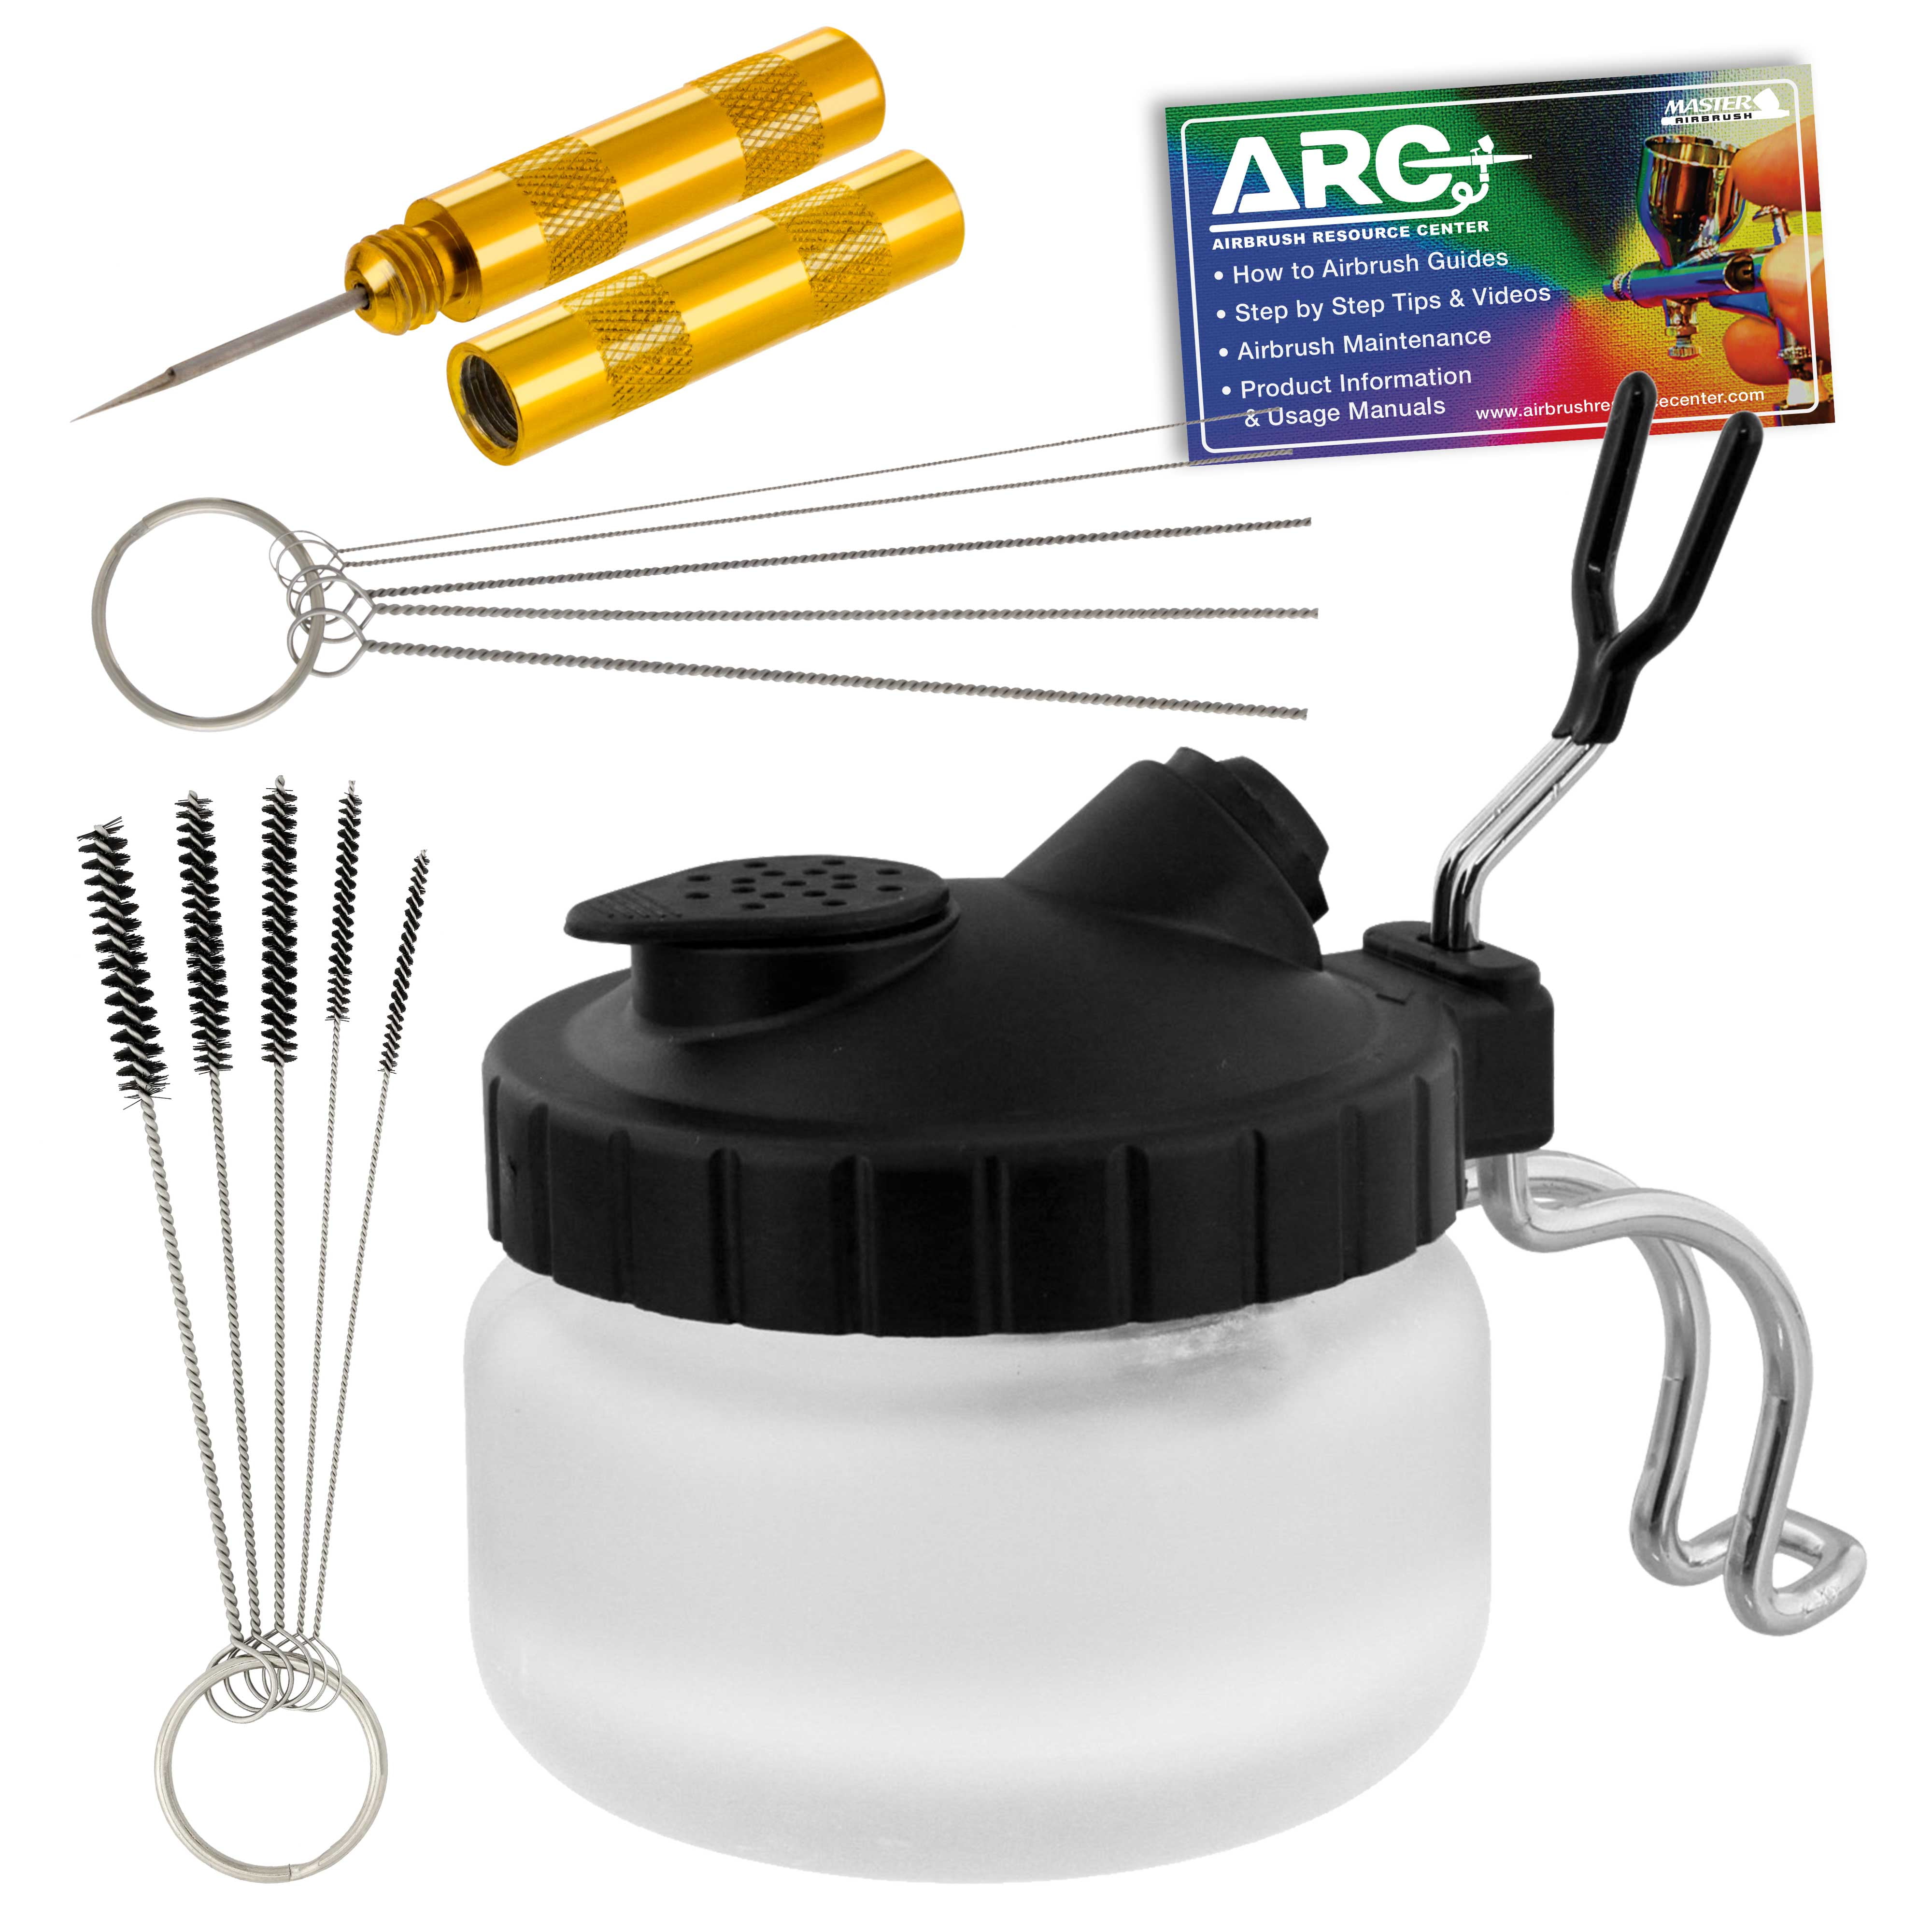 1 Wash Needle Watson & Webb Airbrush Cleaning Kit 5 pc Cleaning Brushes Glass Cleaning Pot Jar with Holder 5 pc Cleaning Needles 